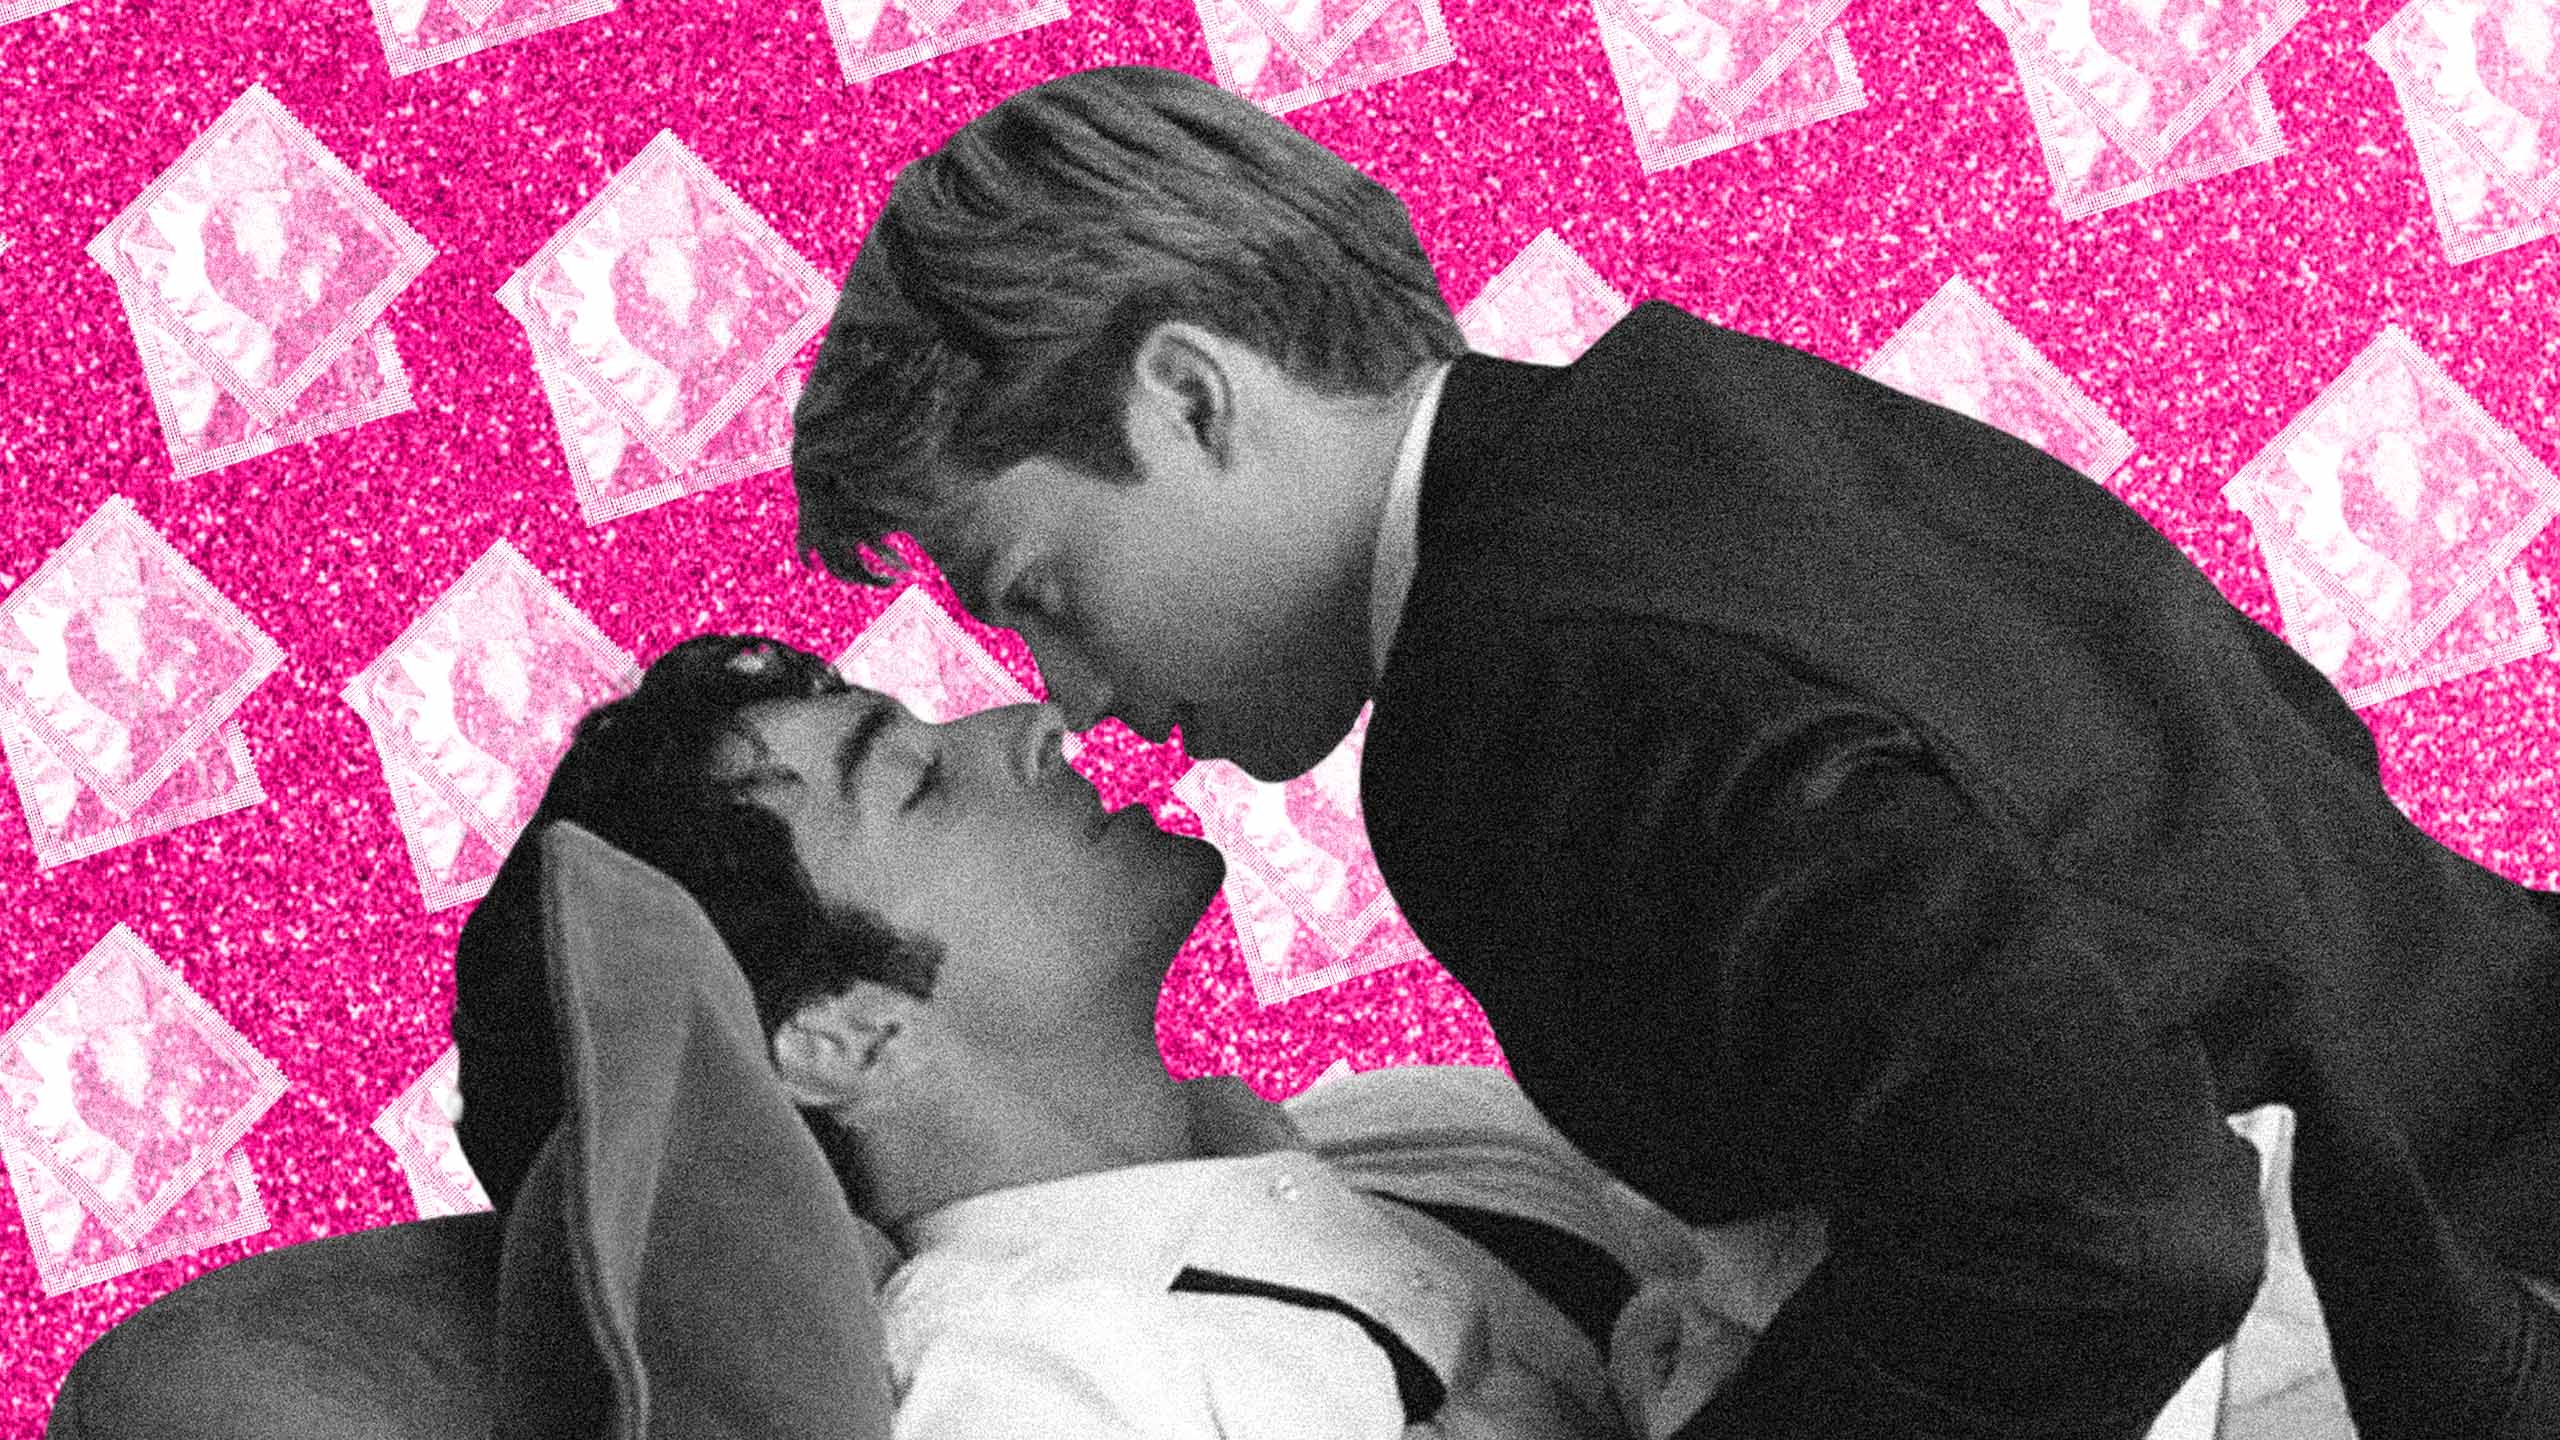 Red, White, and Royal Blue sparks debate over how Hollywood depicts queer sex in film Xtra Magazine